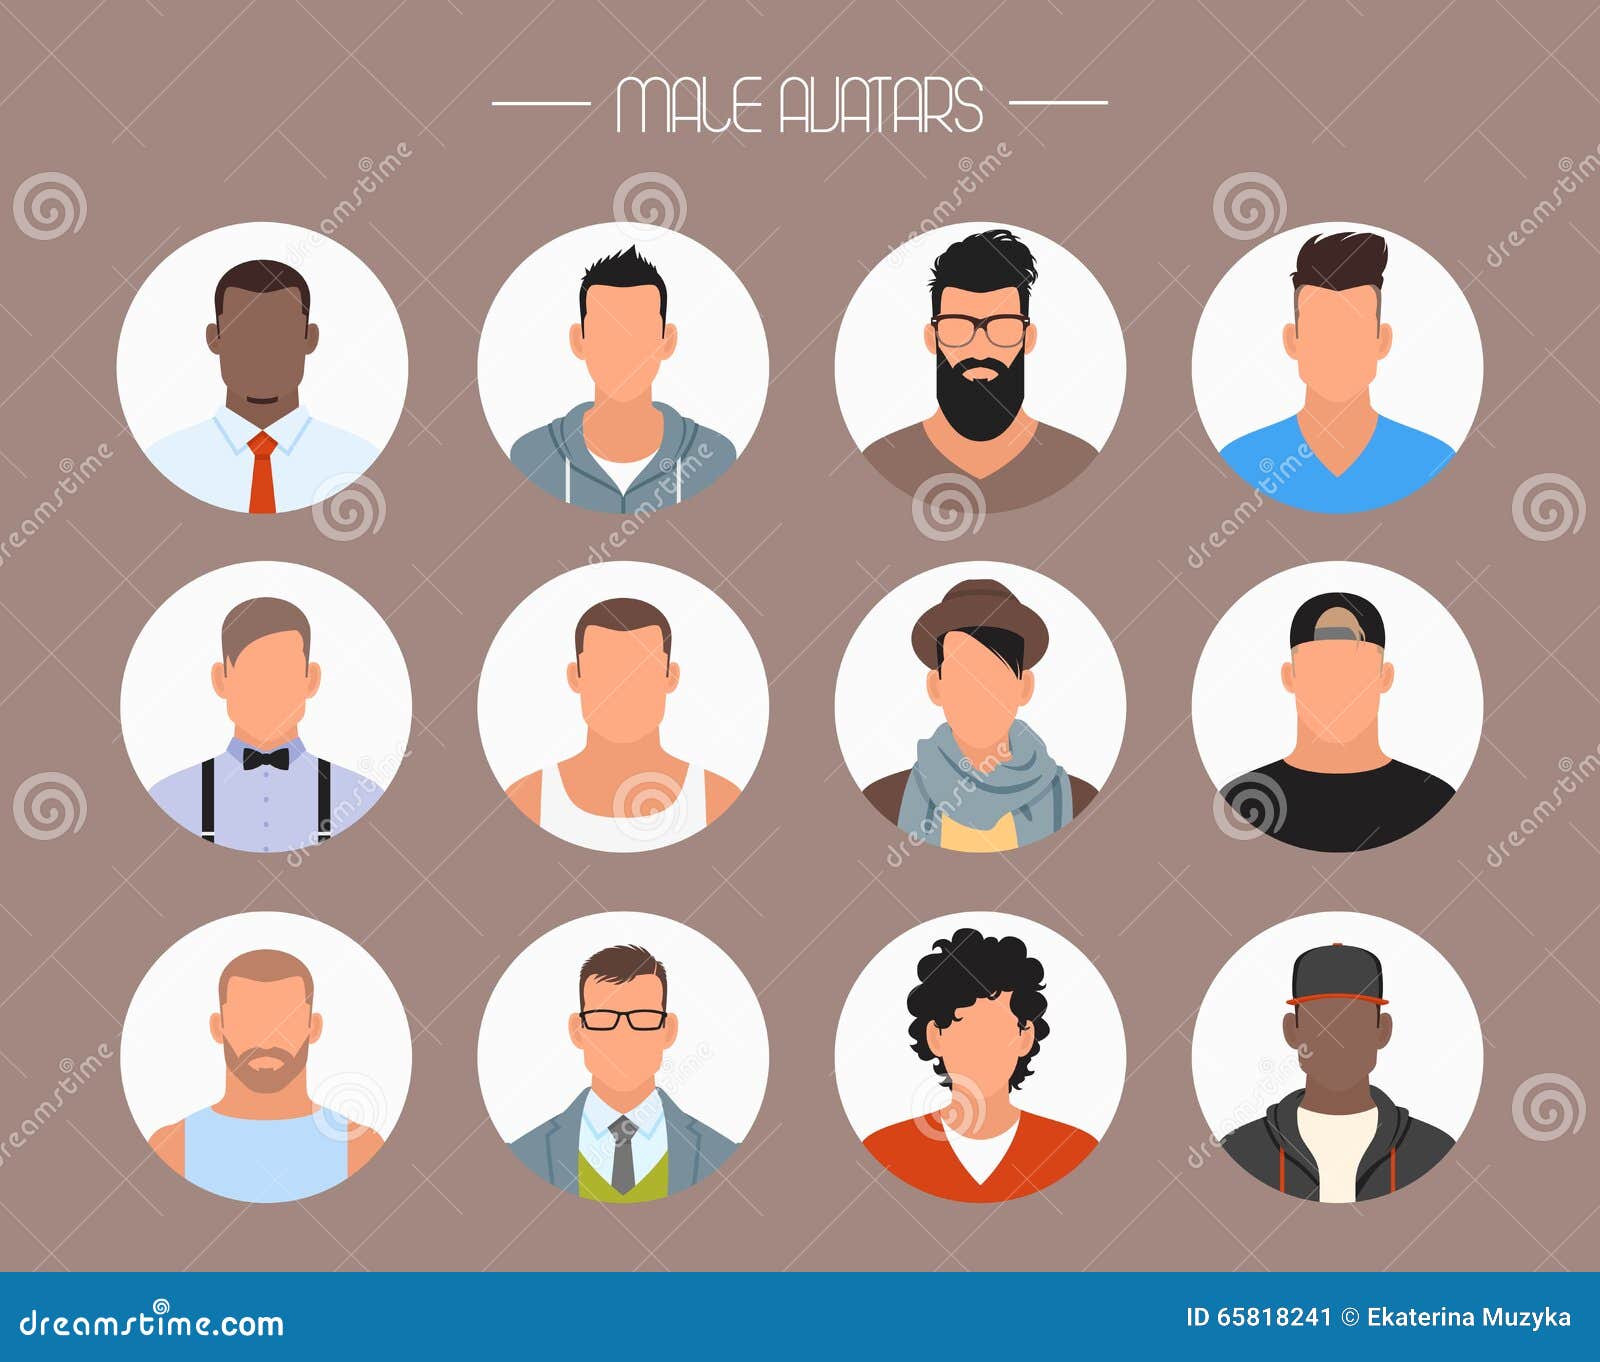 Male Avatar Icons Vector Set. People Characters In Flat 